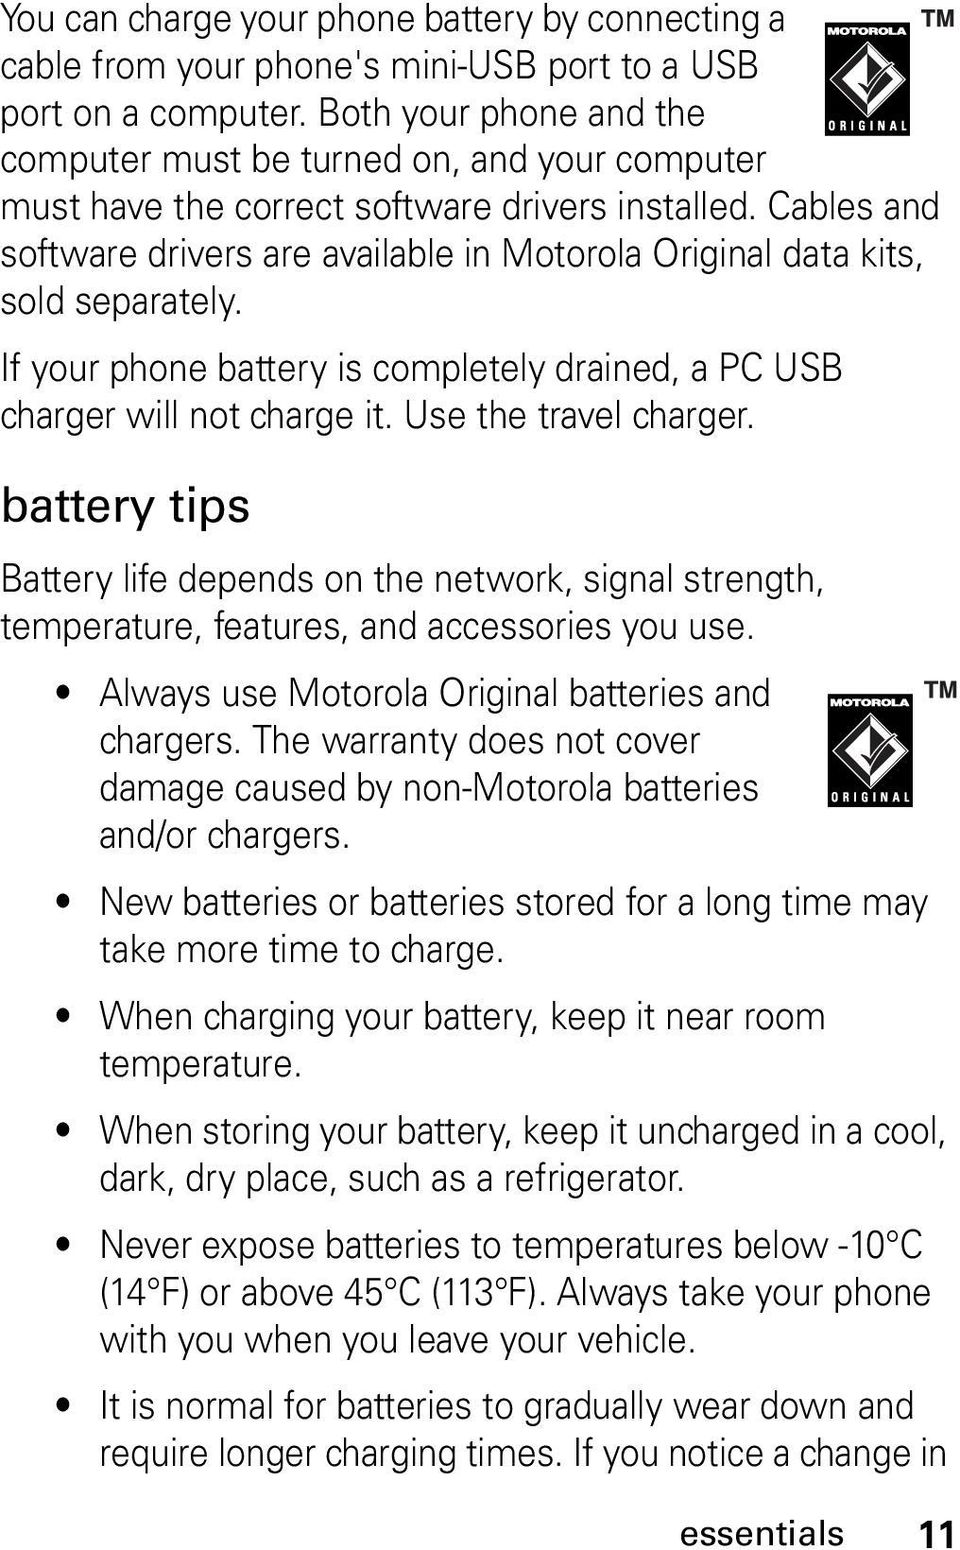 Cables and software drivers are available in Motorola Original data kits, sold separately. If your phone battery is completely drained, a PC USB charger will not charge it. Use the travel charger.